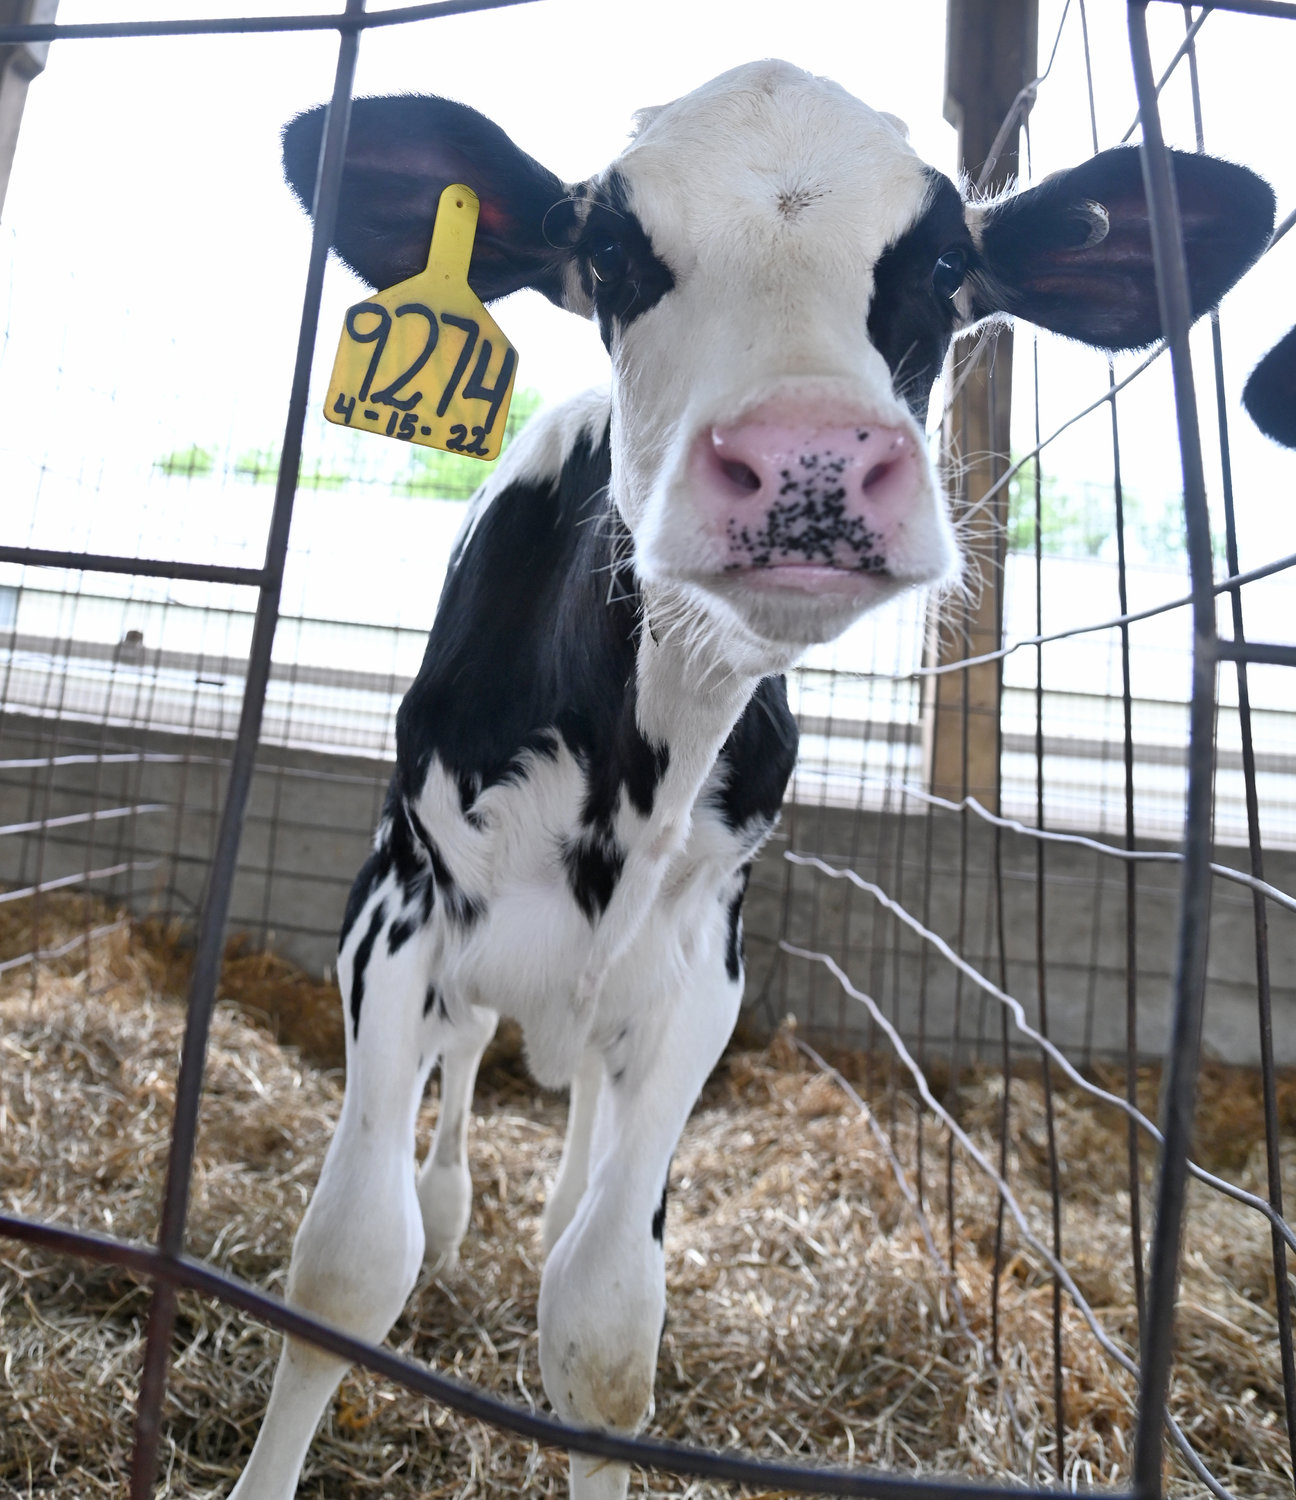 A calf at DiNitto Farms will be at Farm Fest this Friday. The Farm has about 1,200 head of cattle with some 550 cows milked daily.